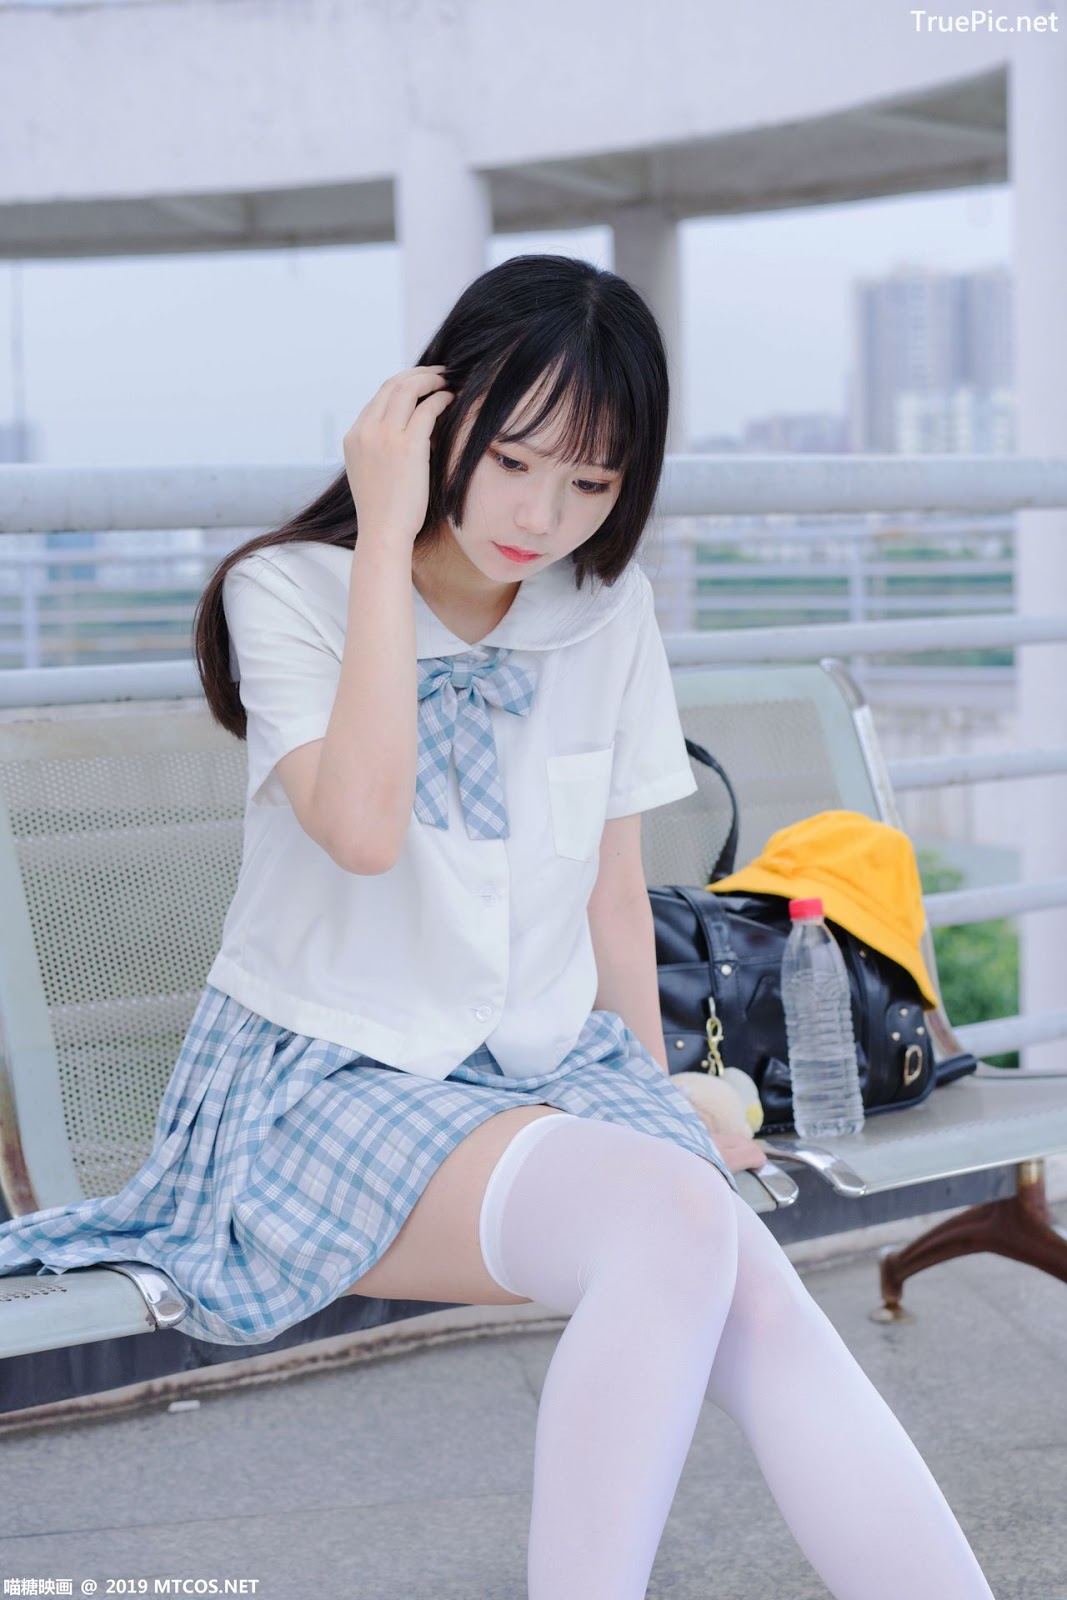 Image [MTCos] 喵糖映画 Vol.015 – Chinese Cute Model - White Shirt and Plaid Skirt - TruePic.net- Picture-23